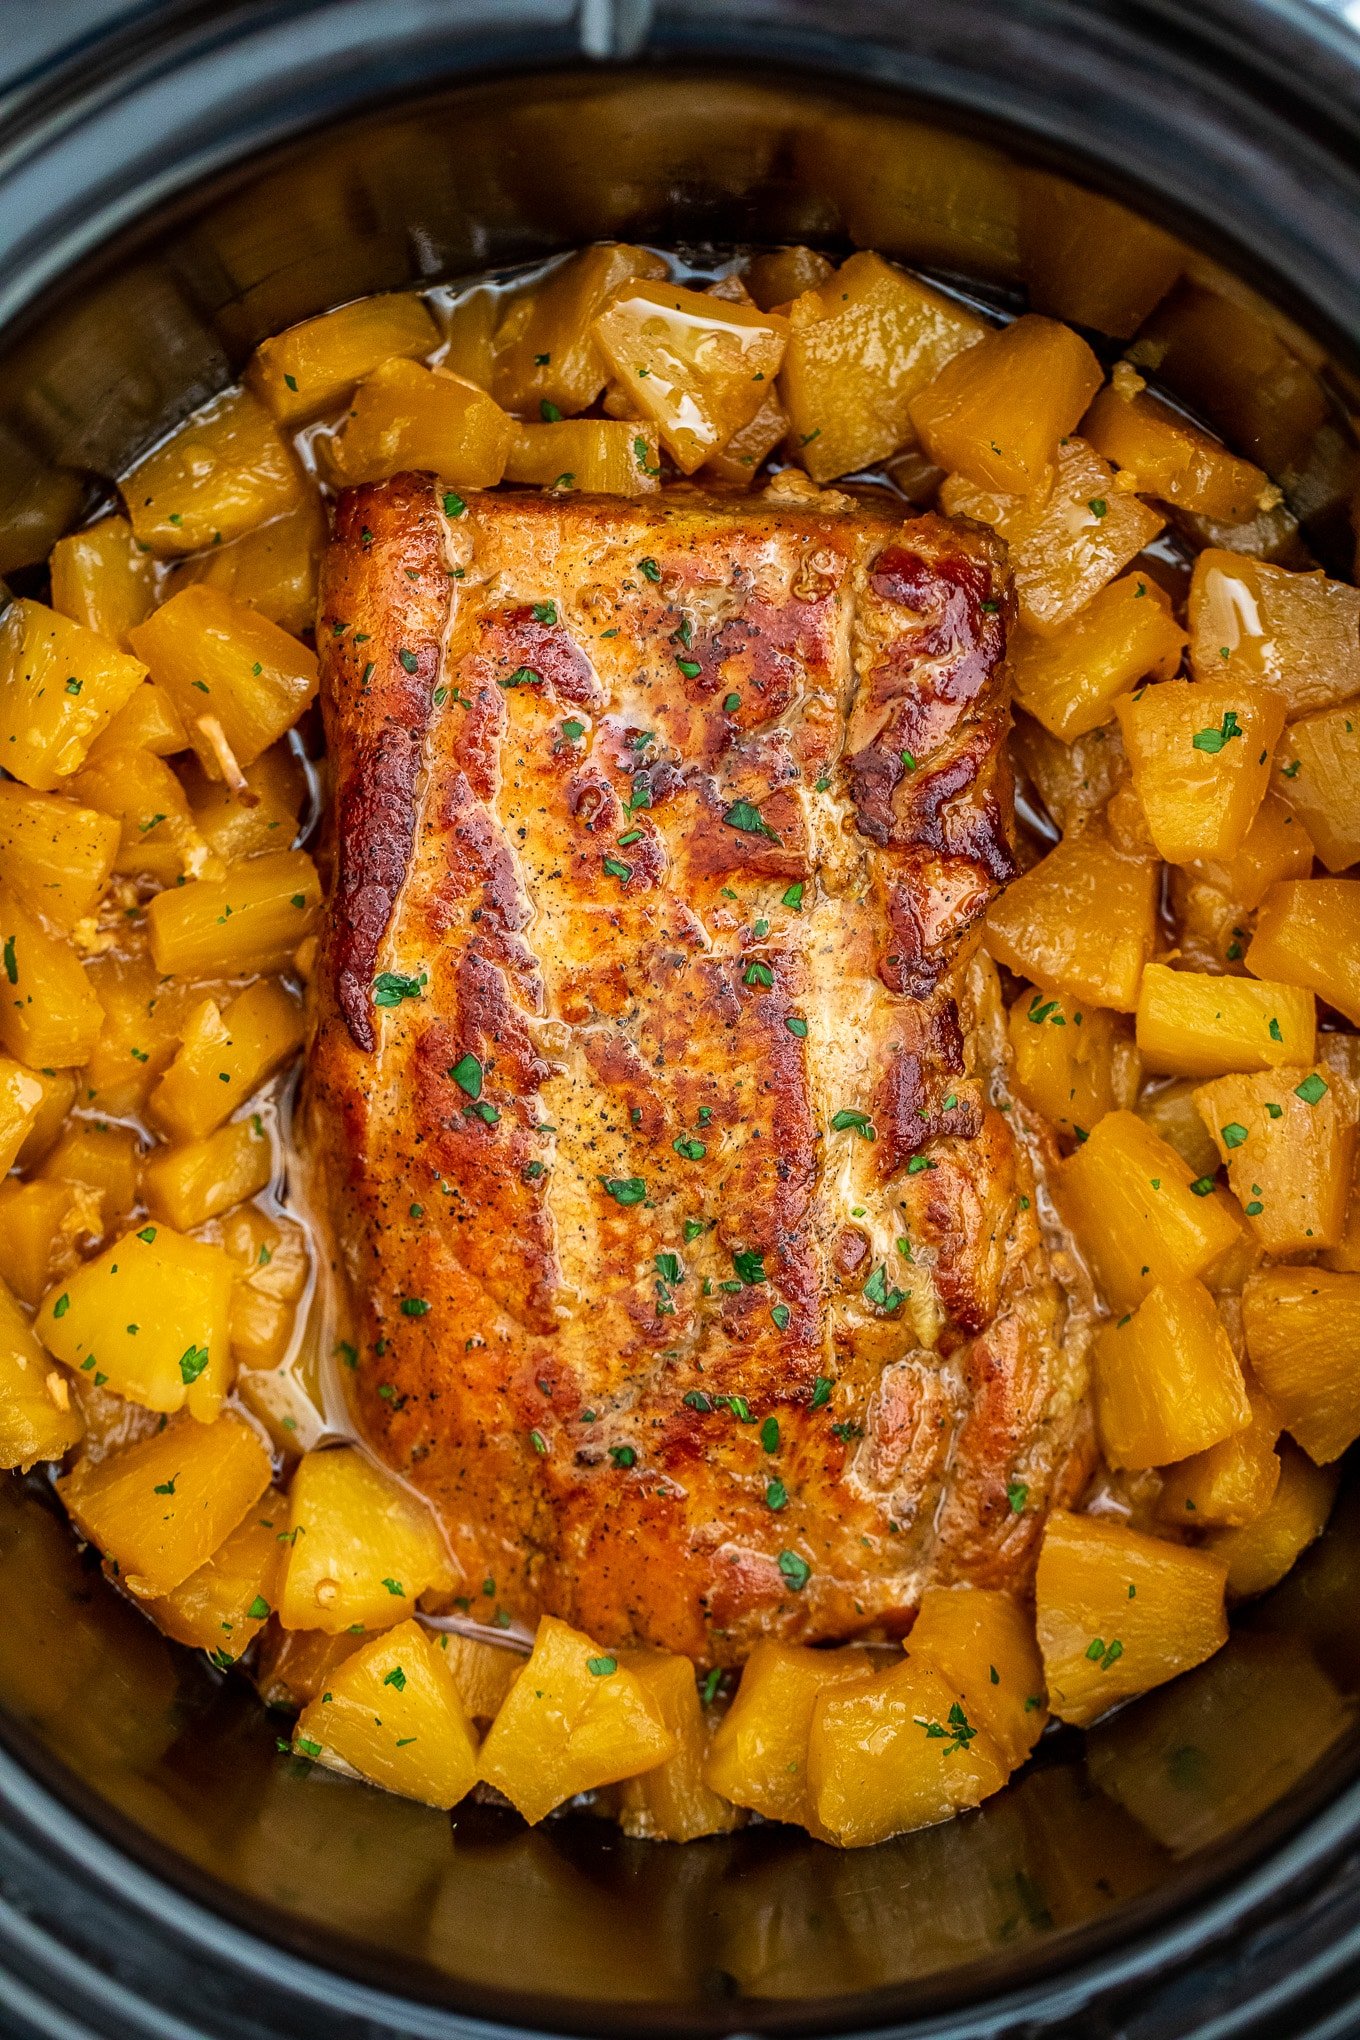 Slow Cooker Pork Loin Pineapple Recipe Video Sweet And Savory Meals,Denver Steak Part Of Cow